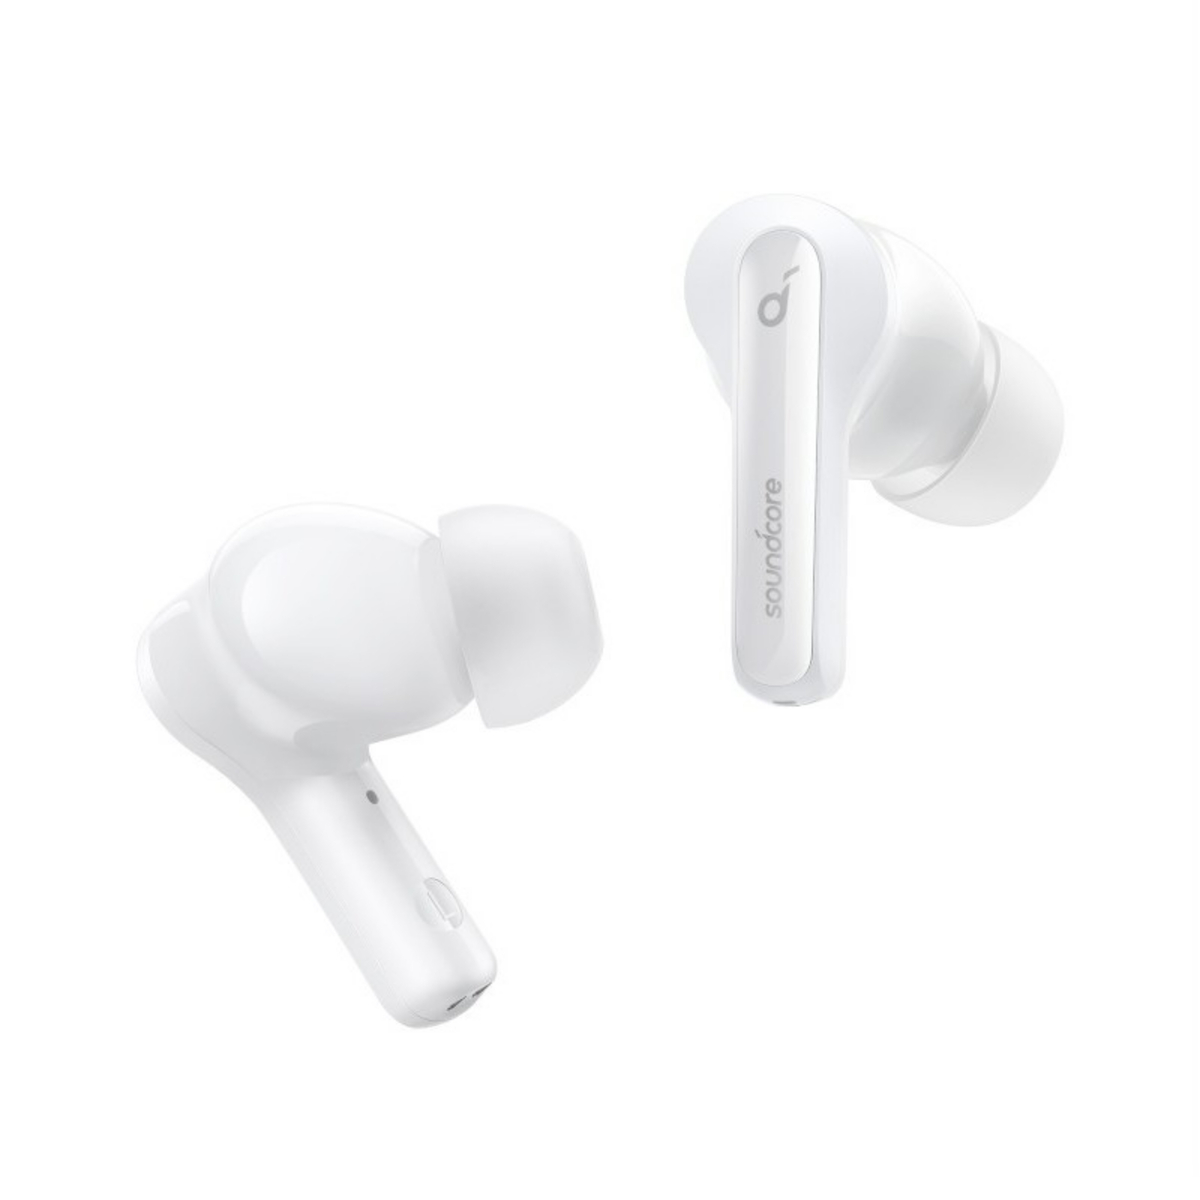 Anker Soundcore Life Note 3i Earbuds, White, A3983H21